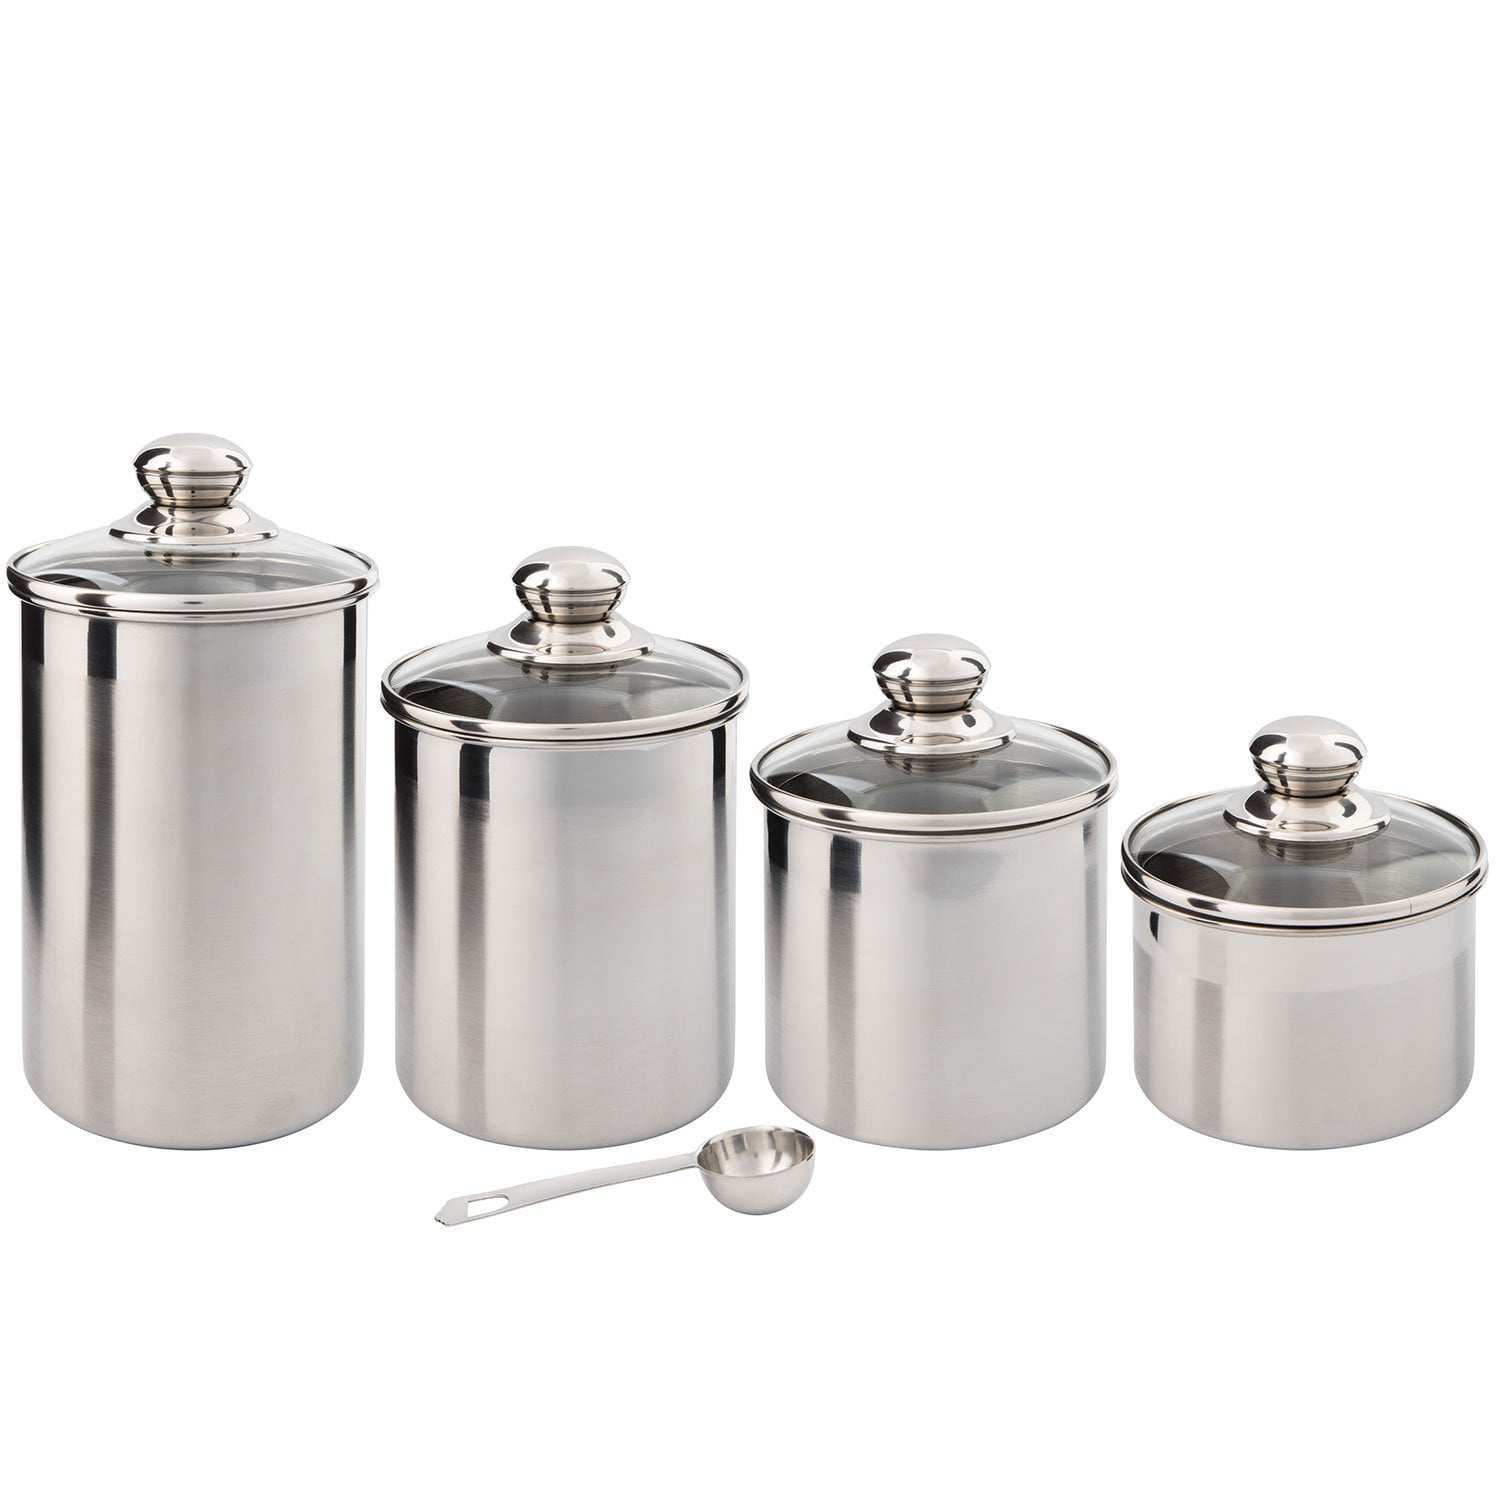 New Anchor Hocking 4-Piece Stainless Steel Clamp Canister Set with Clear Lid 